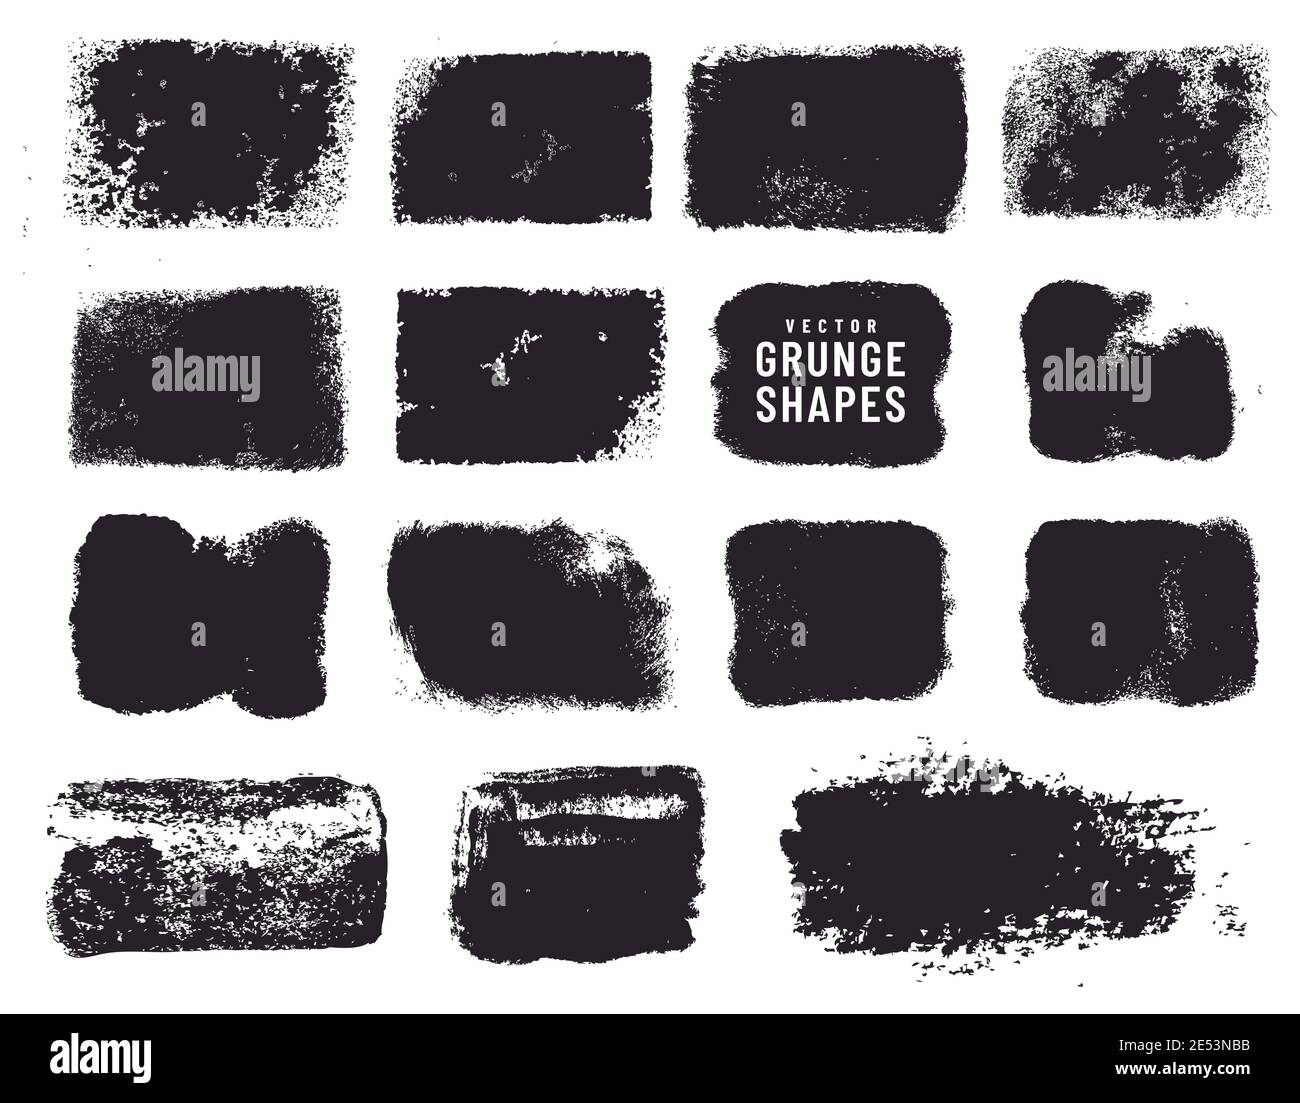 Grunge shapes and ink stains isolated on white background. Black vector design elements for frame, clipping masks, background, banner or text box. Stock Vector